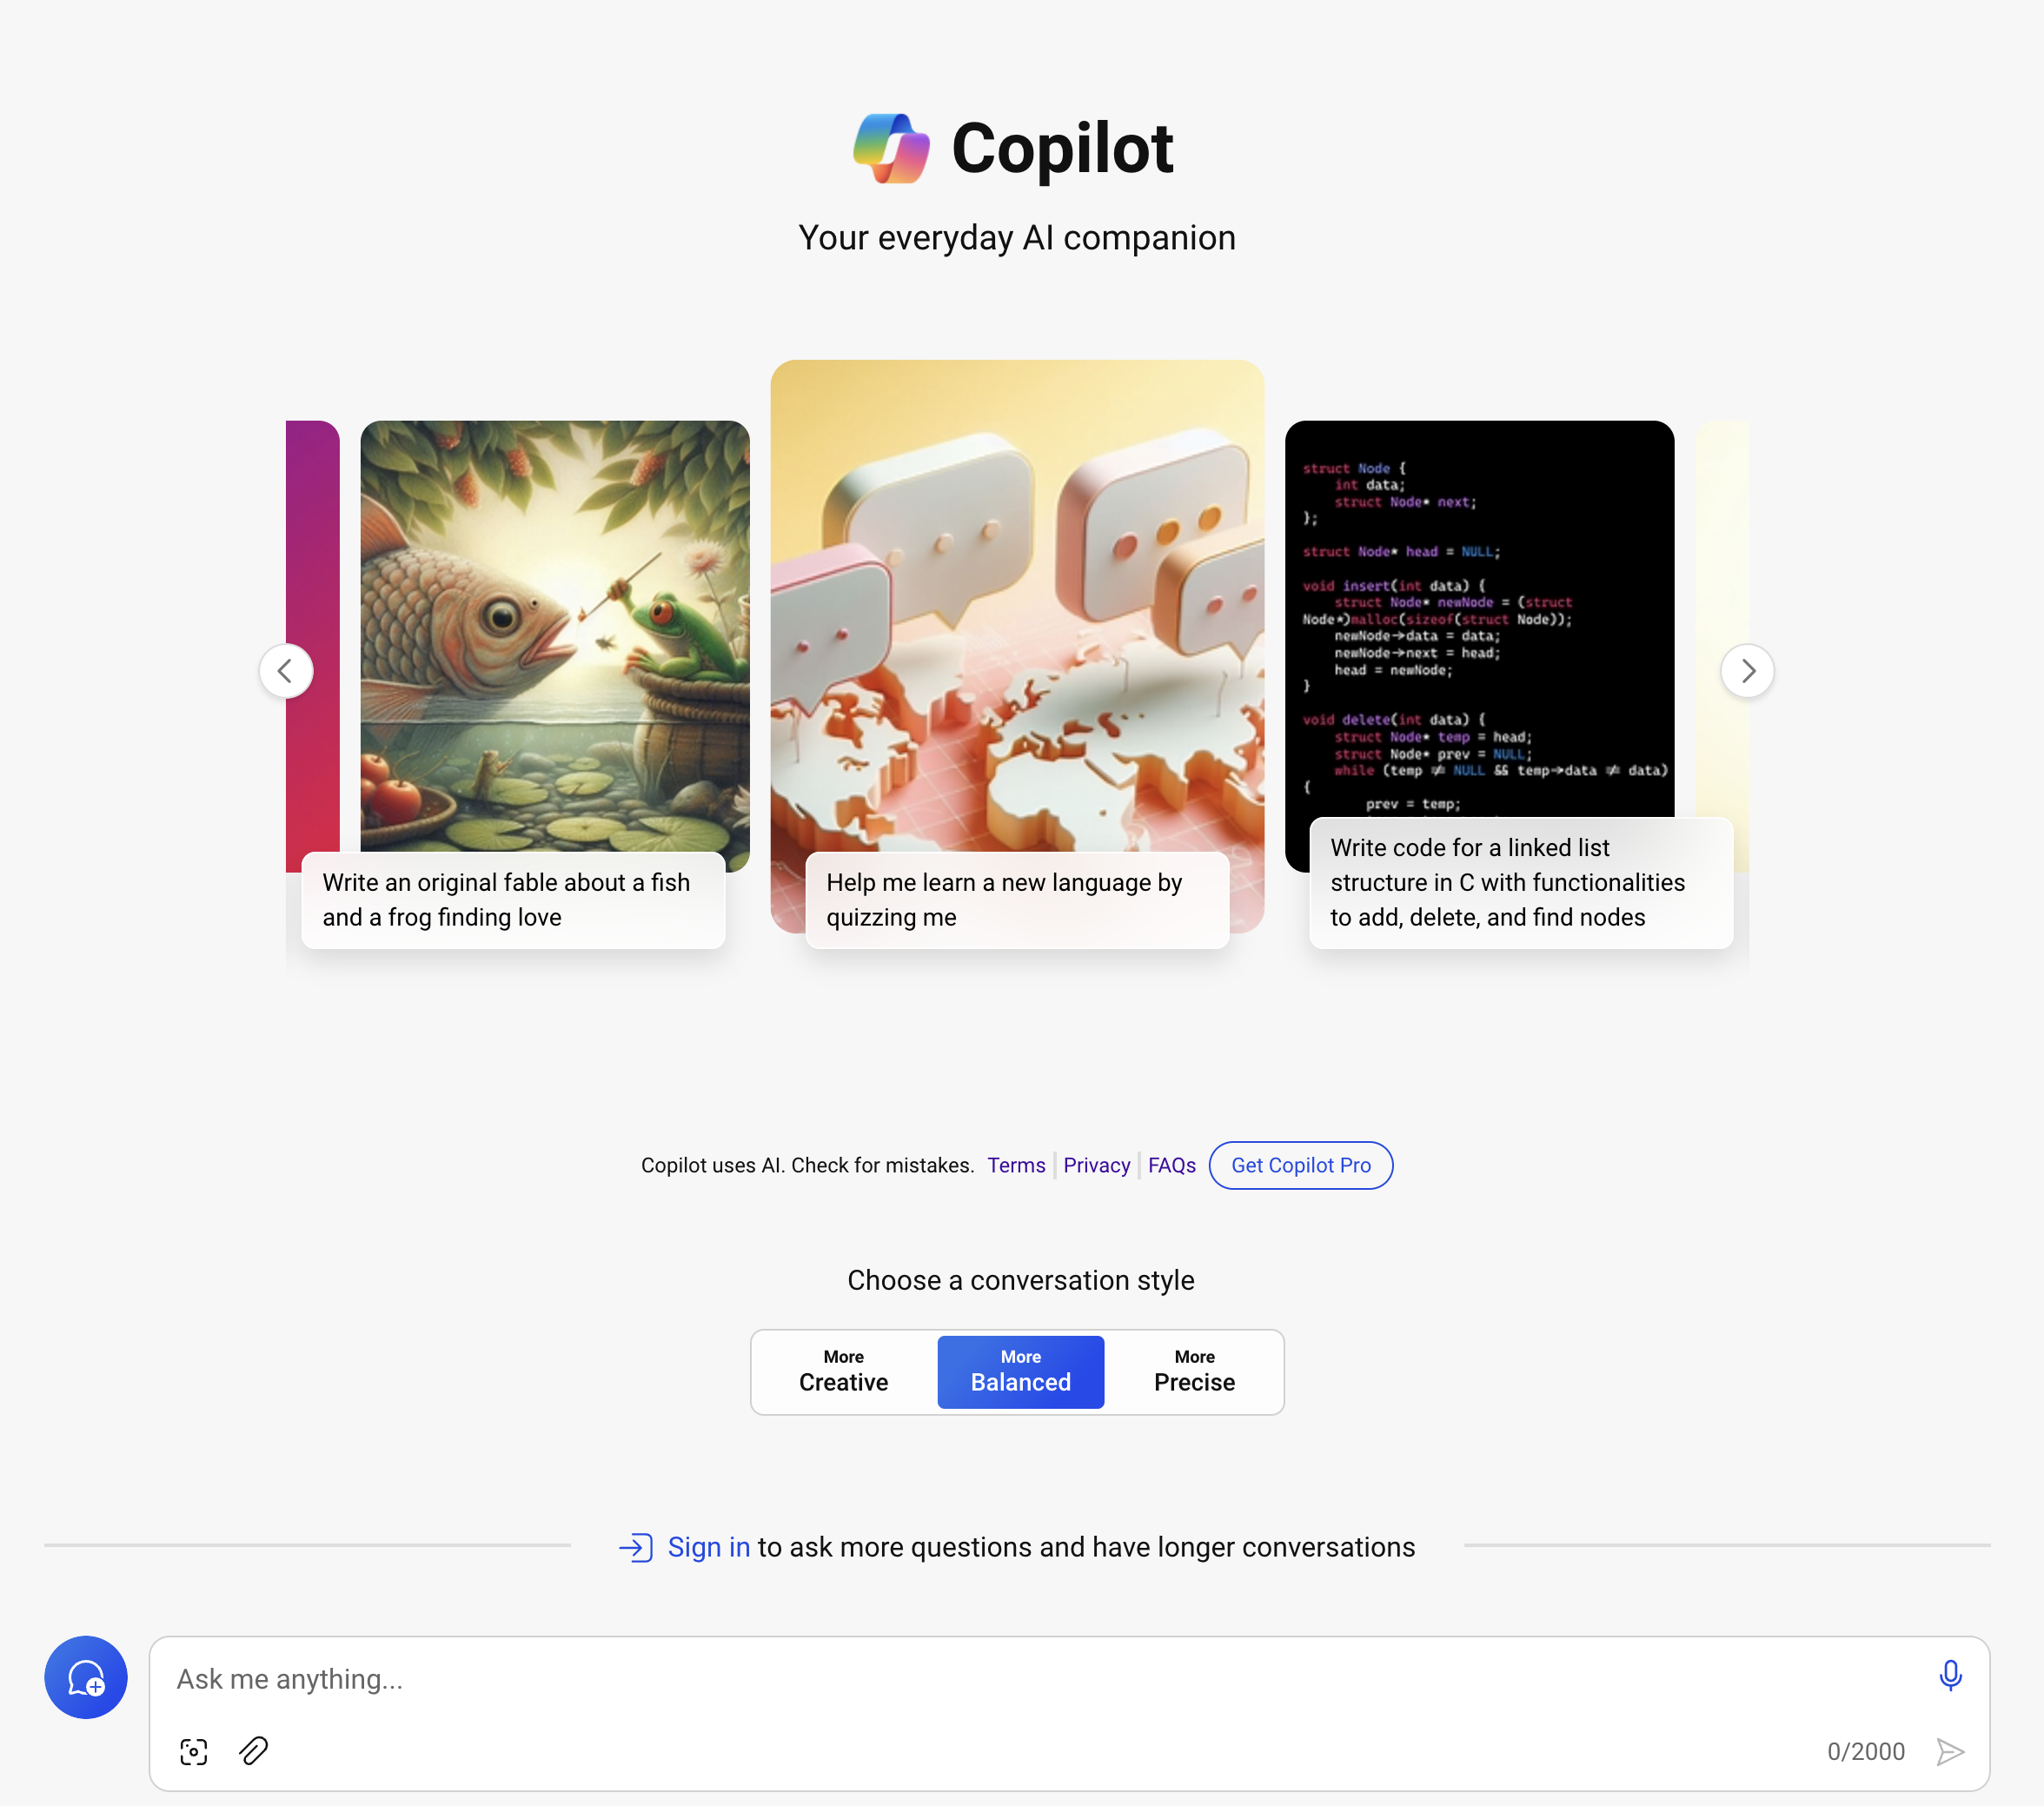 Microsoft Copilot homepage with options to write original content, learn a new language, and code examples